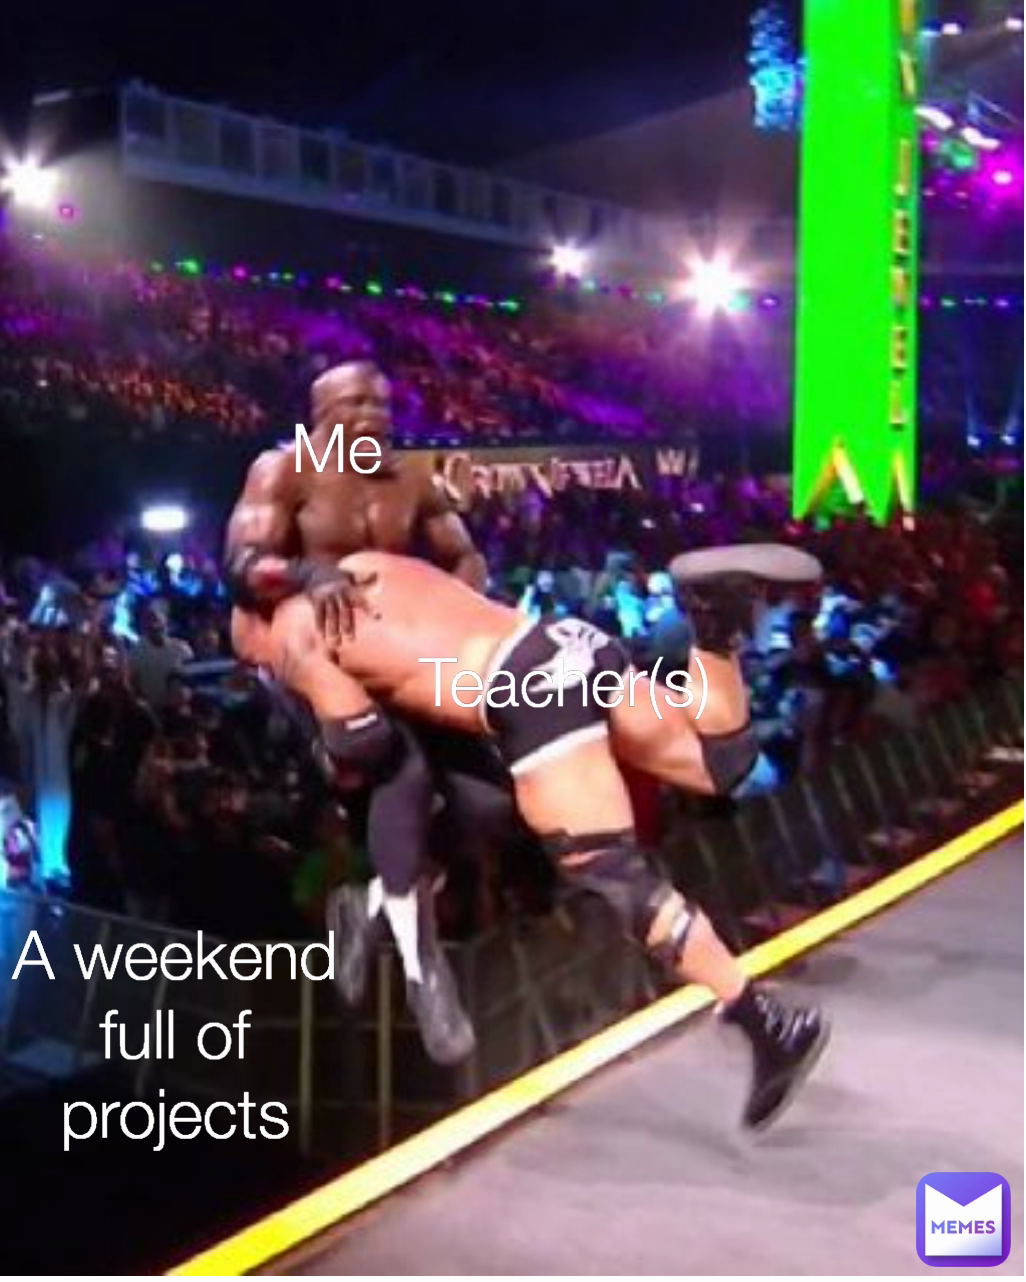 Me A weekend full of projects Teacher(s)